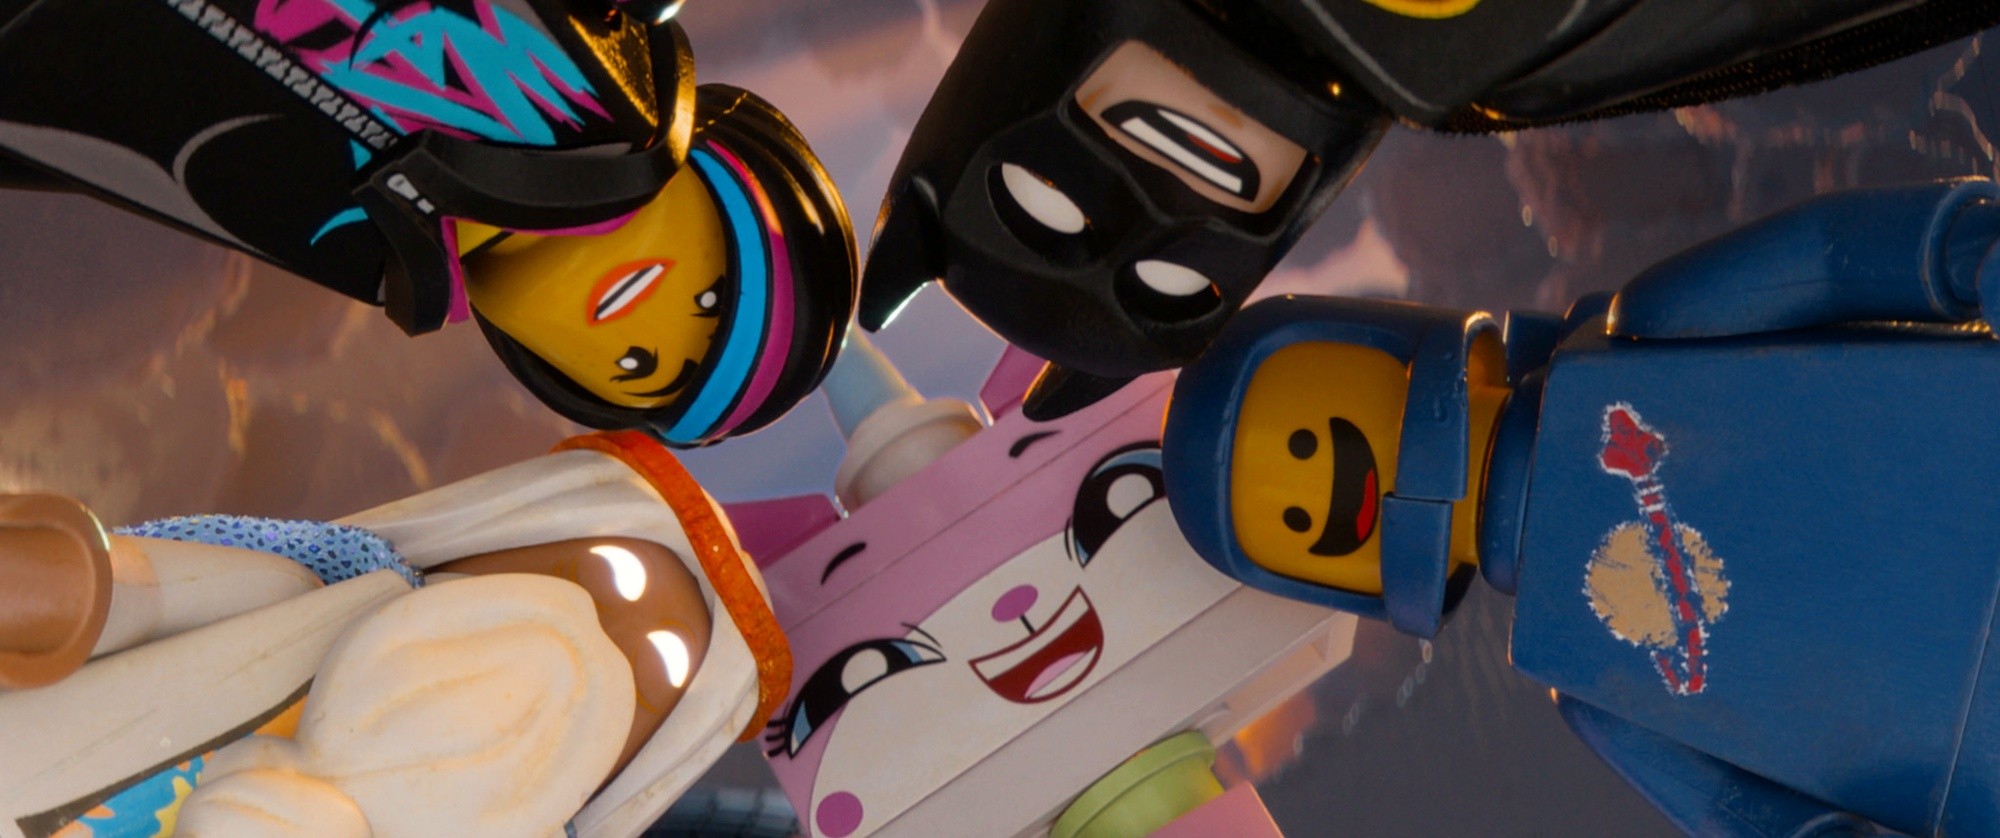 Vitruvius, Lucy, Batman, Benny and Uni-Kitty from Warner Bros. Pictures' The Lego Movie (2014)